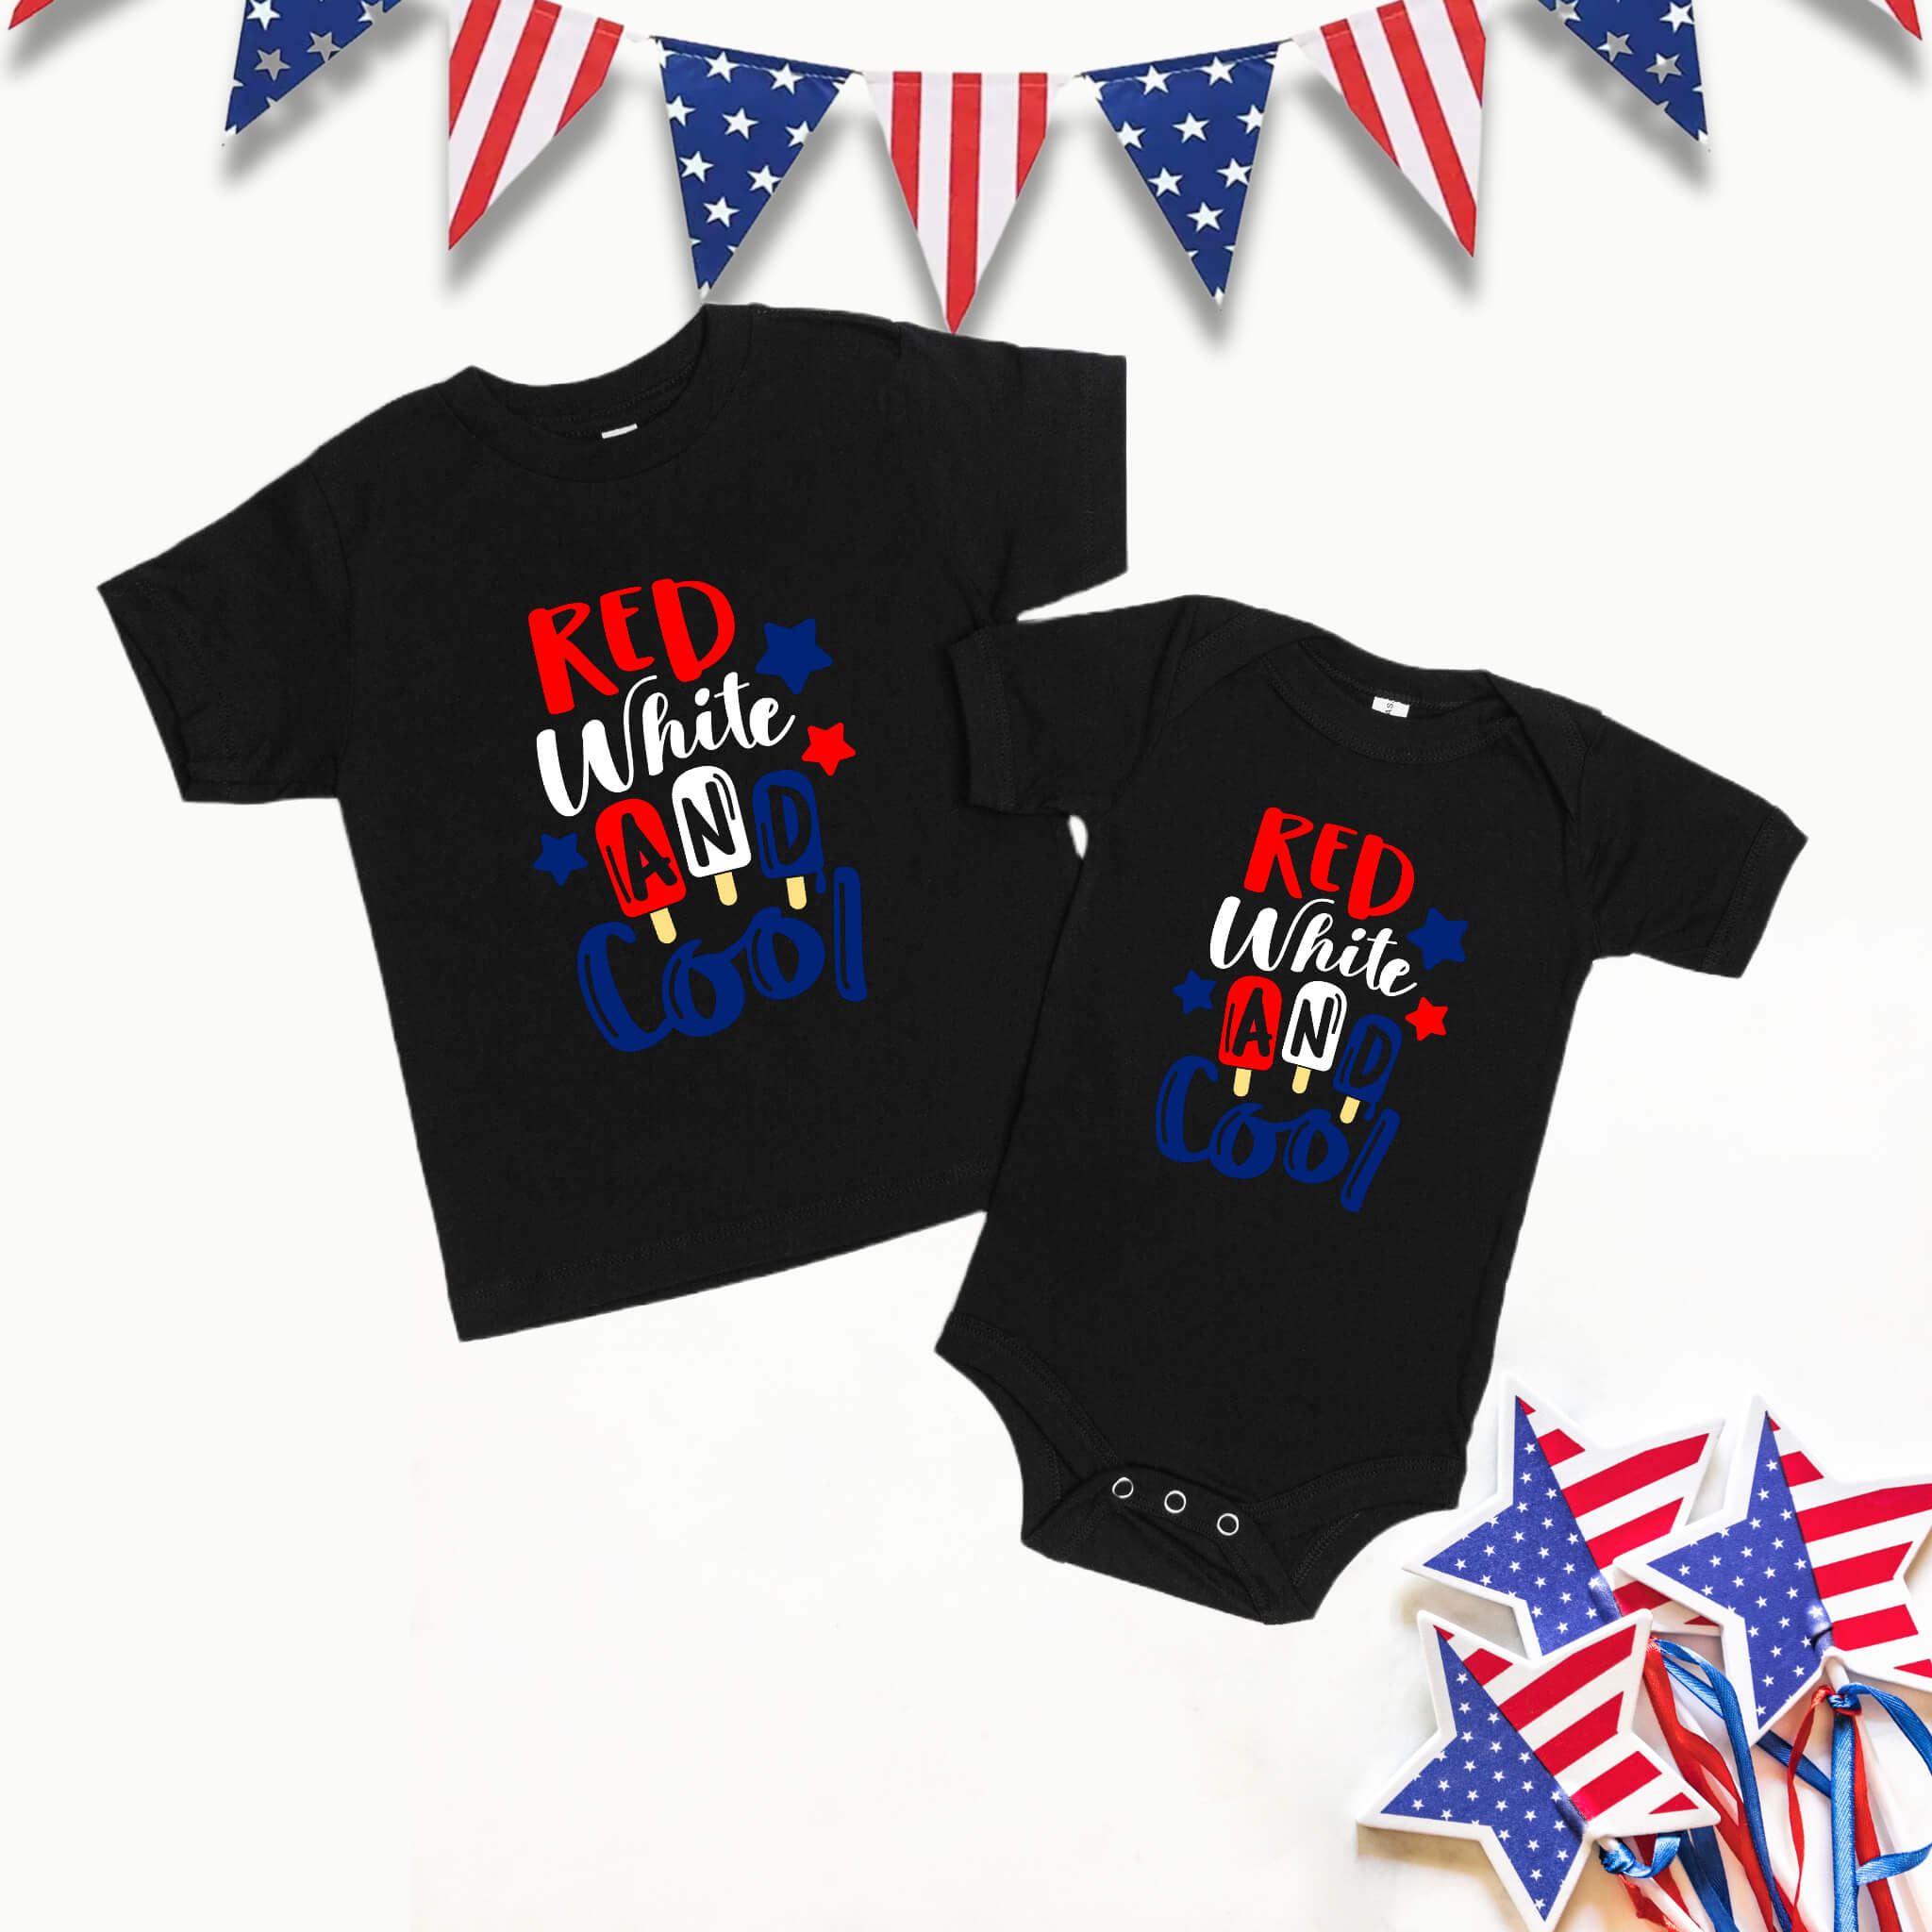 4th of July - Red White & Cool Patriotic Boy’s Girl’s Unisex Graphic Print Onesie / T-shirt